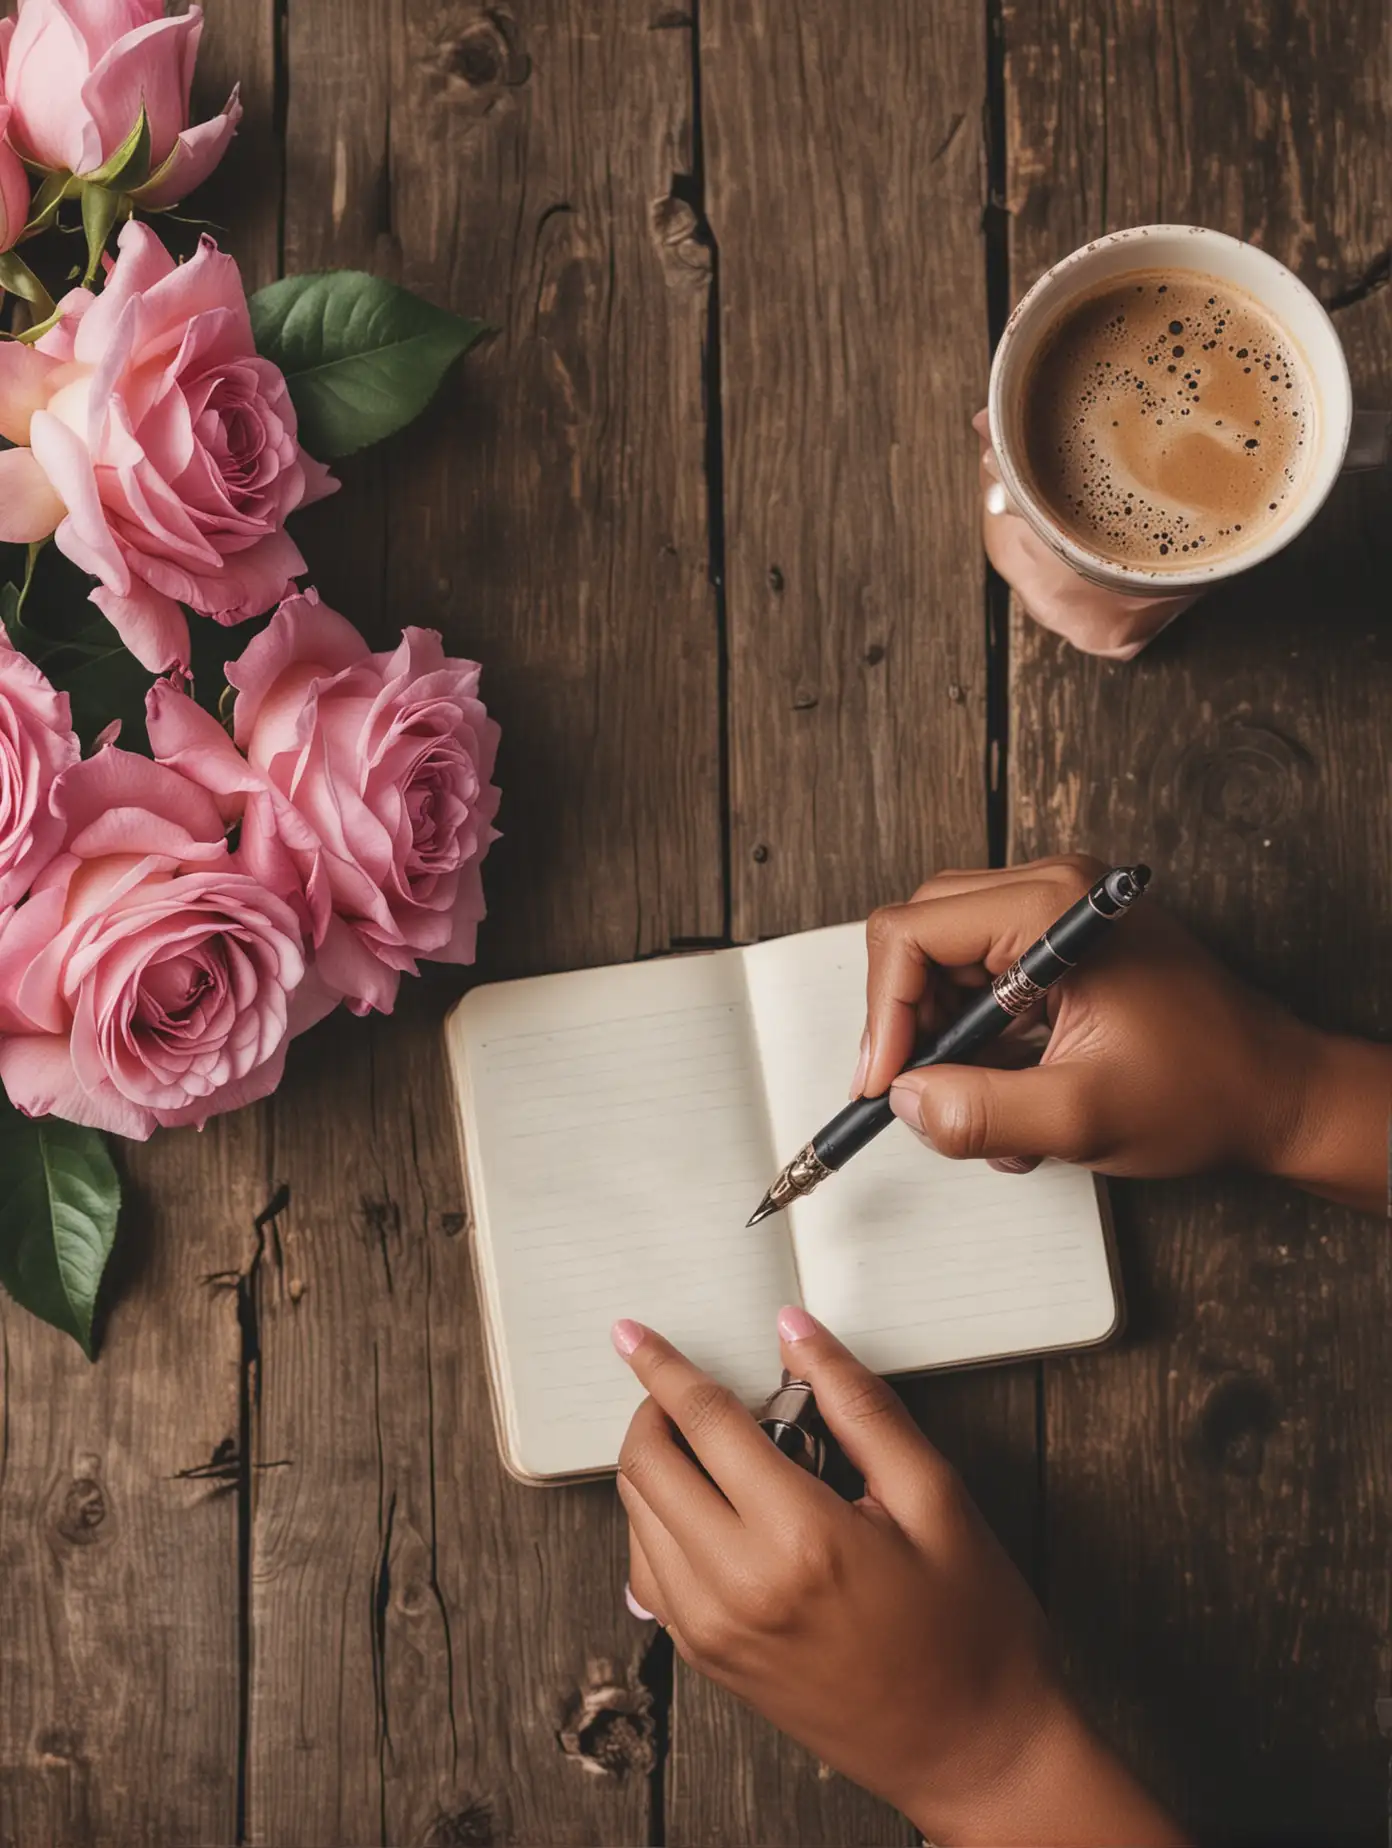 Elegant Black Woman Writing in Journal on Rustic Wood Table with Pink Roses